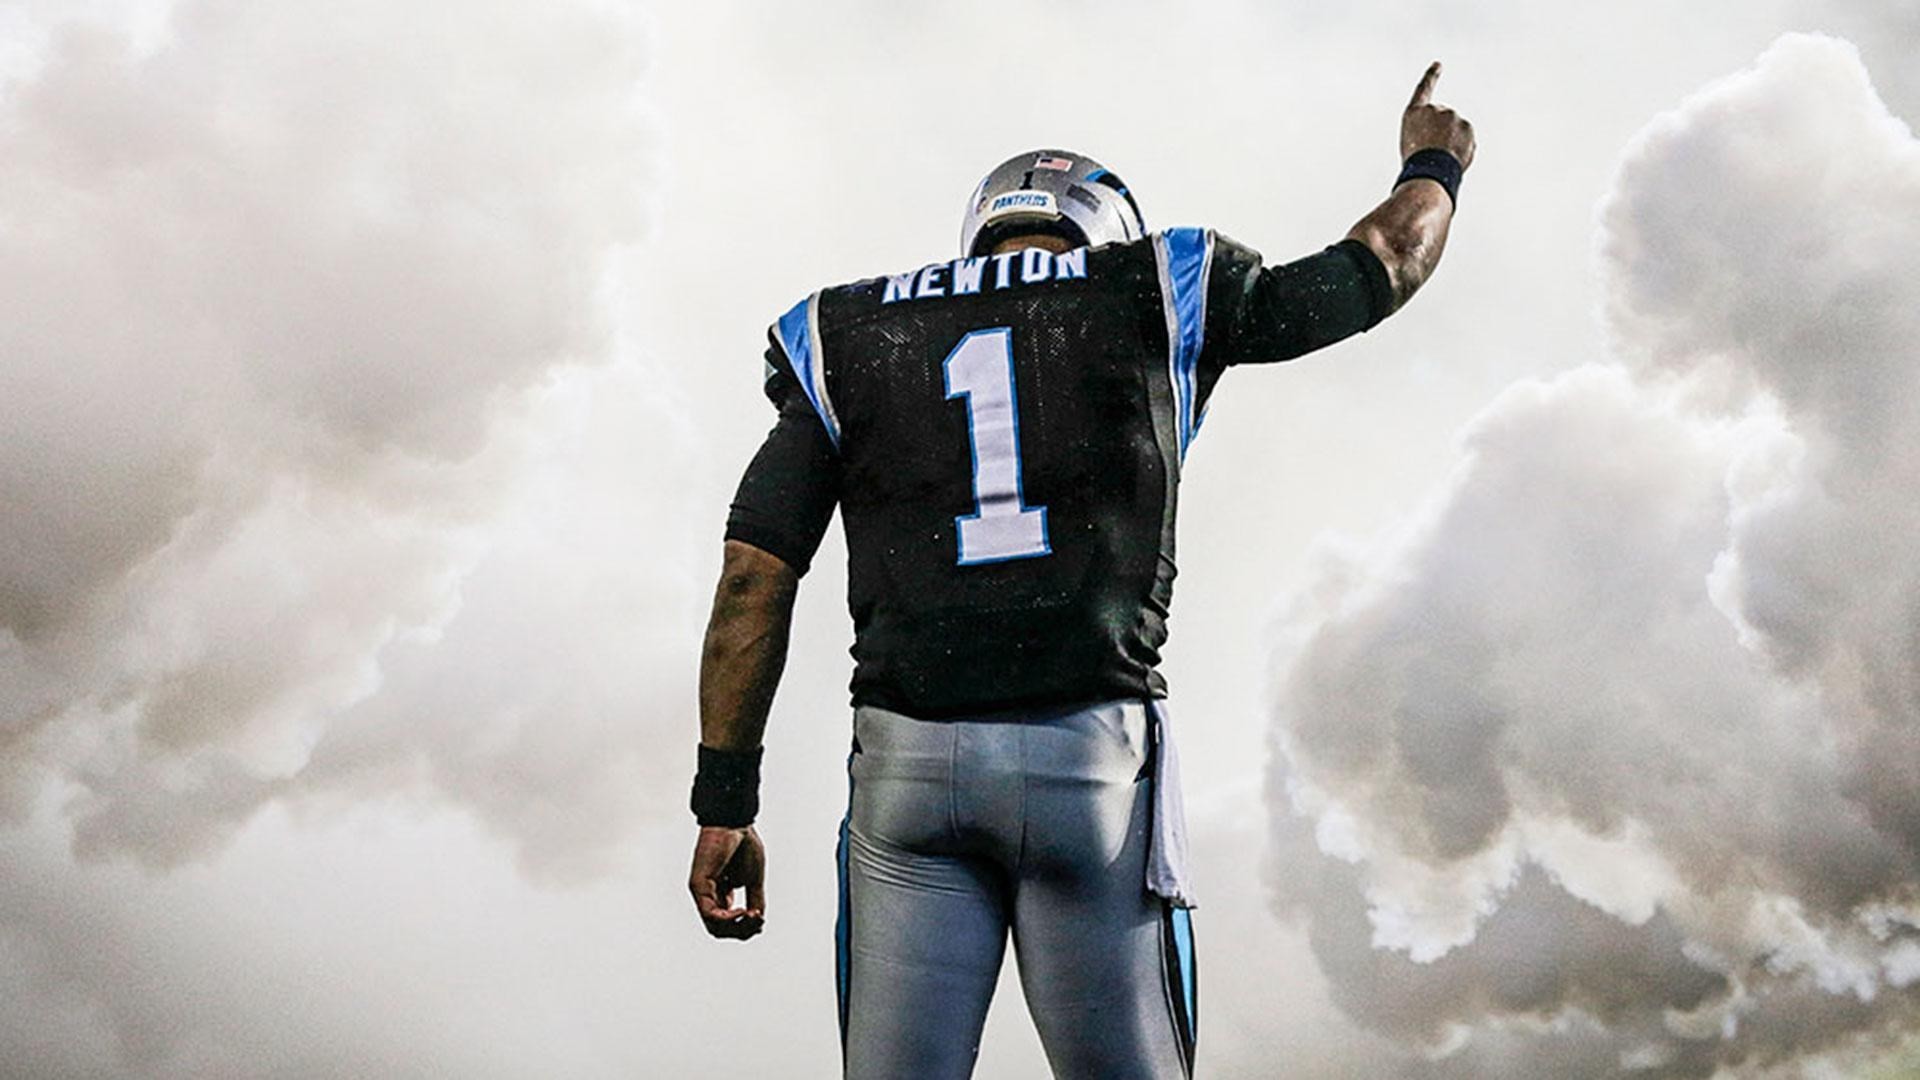 Px Free Awesome cam newton wallpaper by Hearn Nail for PKF